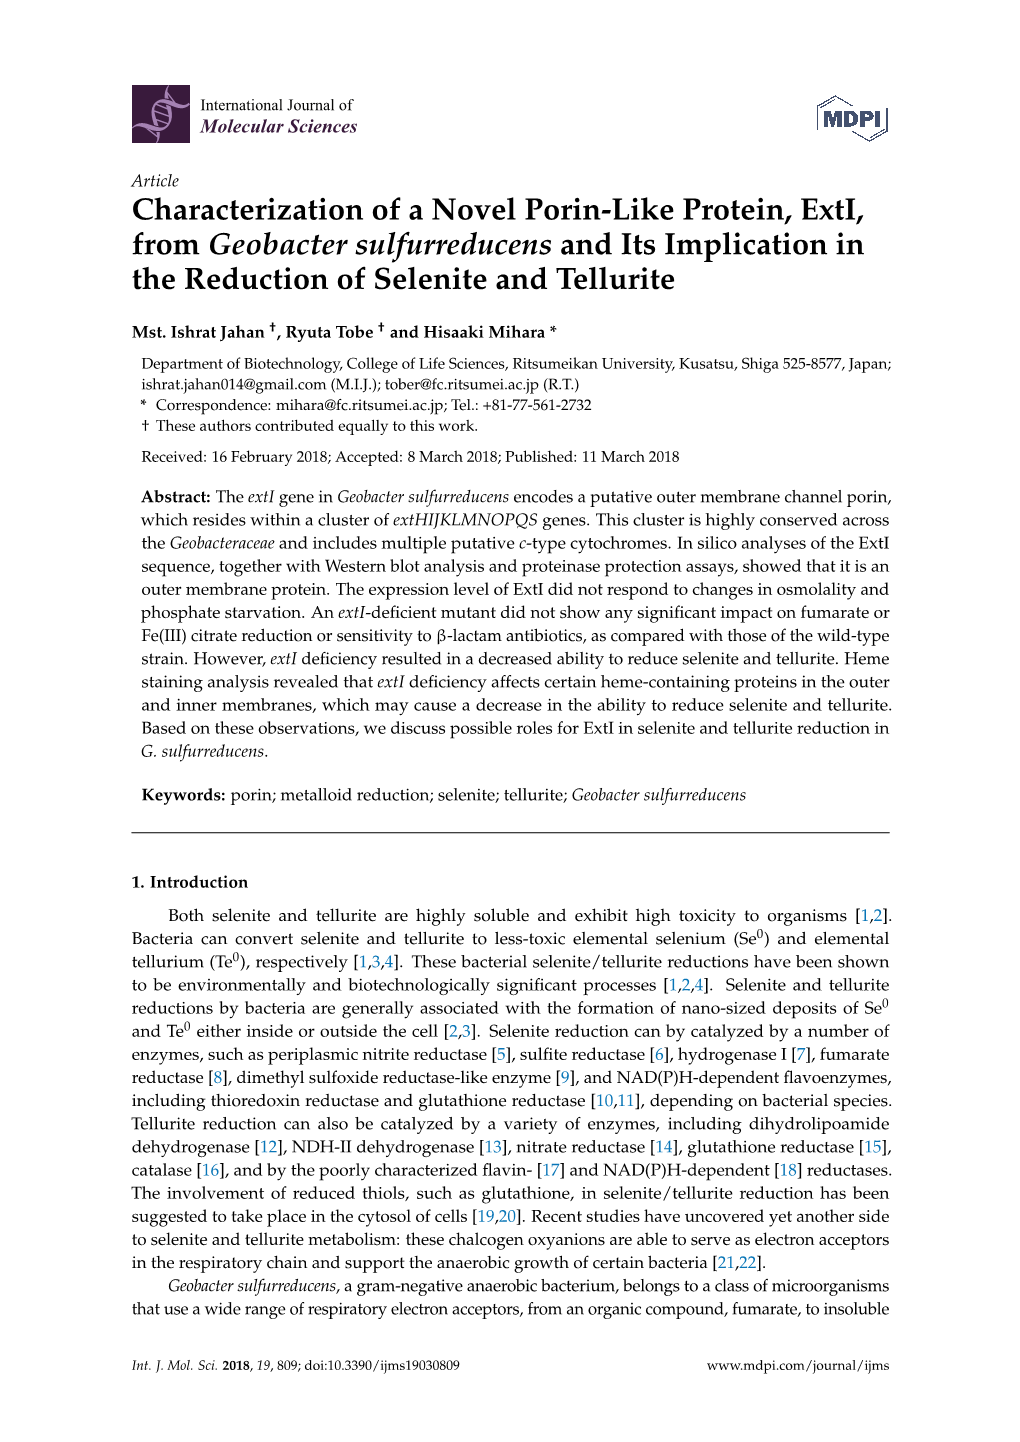 Characterization of a Novel Porin-Like Protein, Exti, from Geobacter Sulfurreducens and Its Implication in the Reduction of Selenite and Tellurite